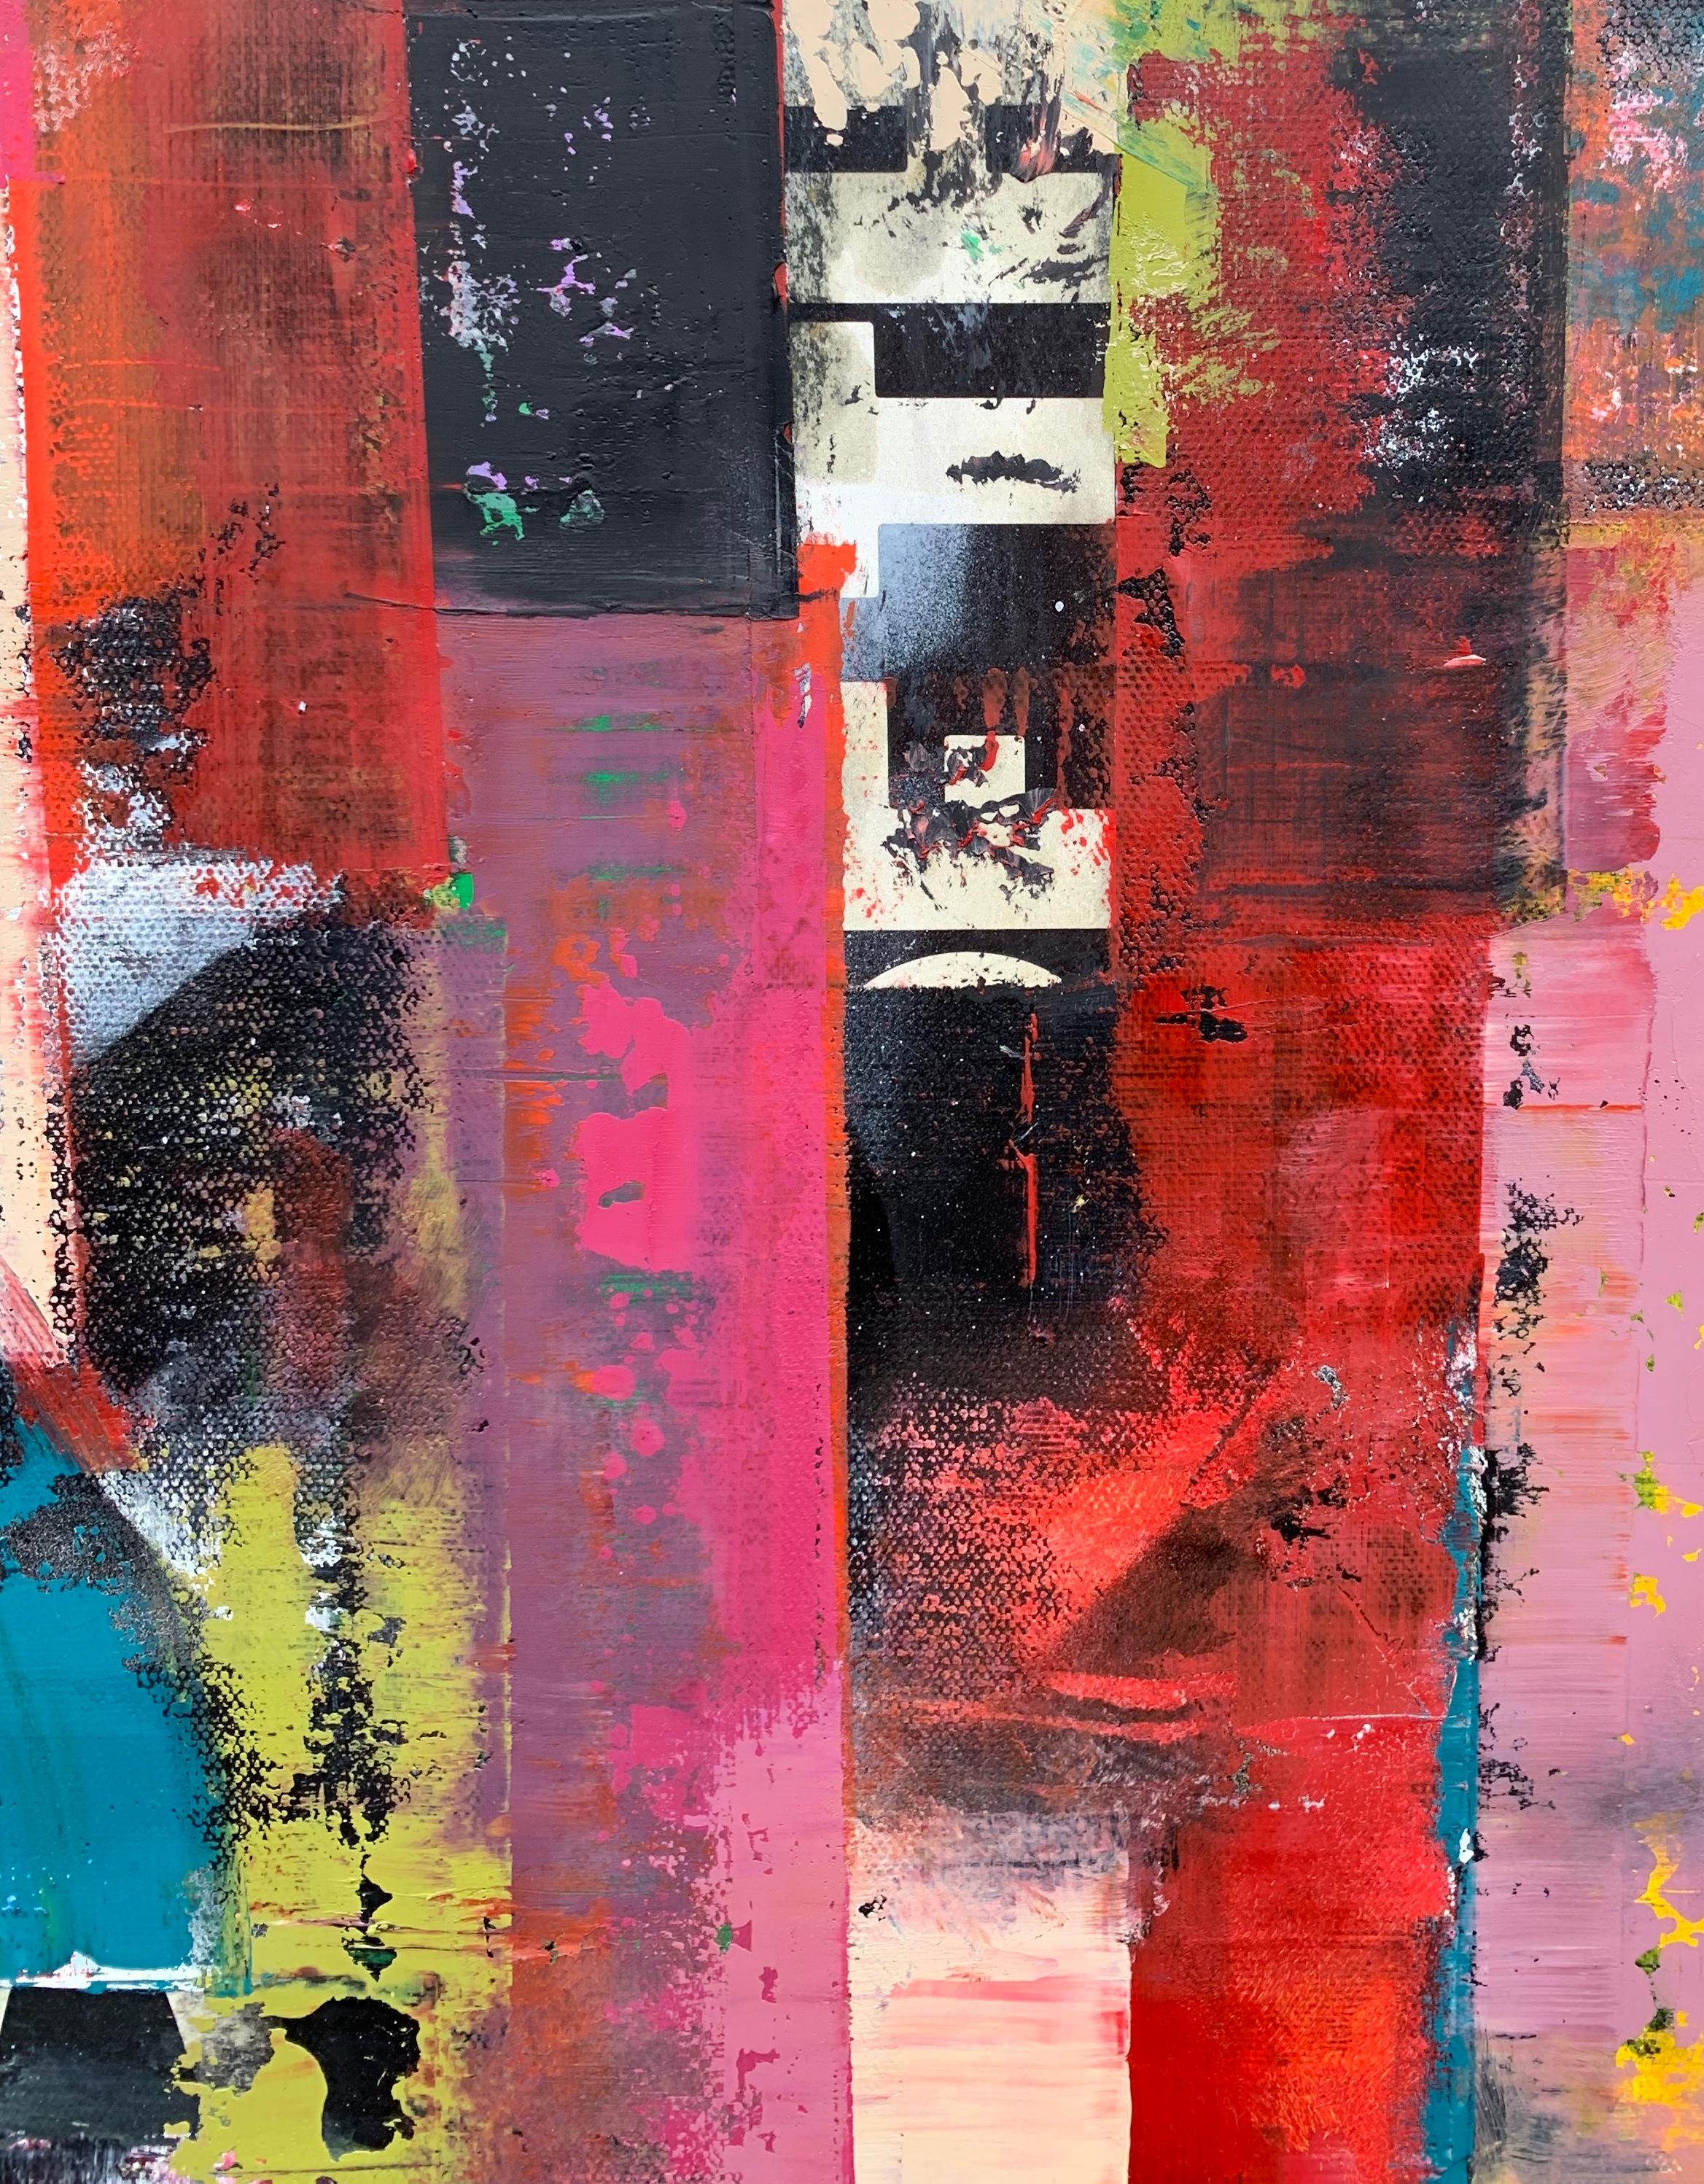 <p>Artist Comments<br /></p><p>About the Artist<br />Janet Hamilton is an abstract expressionist who creates heavily-textured and multi-layered paintings. She is an Illinois-based artist whose studio space is a converted library complete with